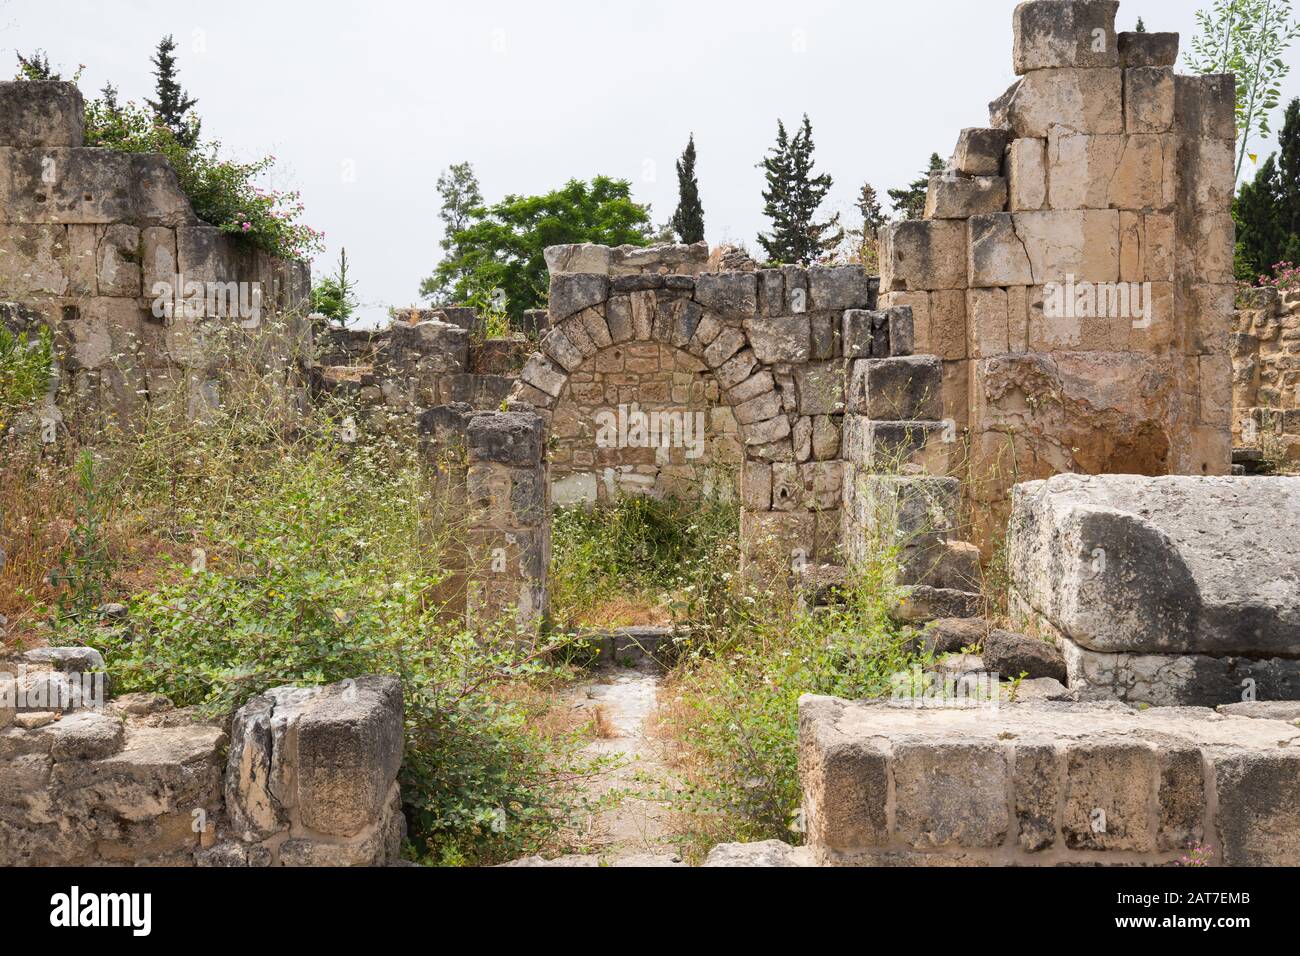 Al-Bass Tyre necropolis. Roman remains in Tyre. Tyre is an ancient Phoenician city. Tyre, Lebanon - June, 2019 Stock Photo